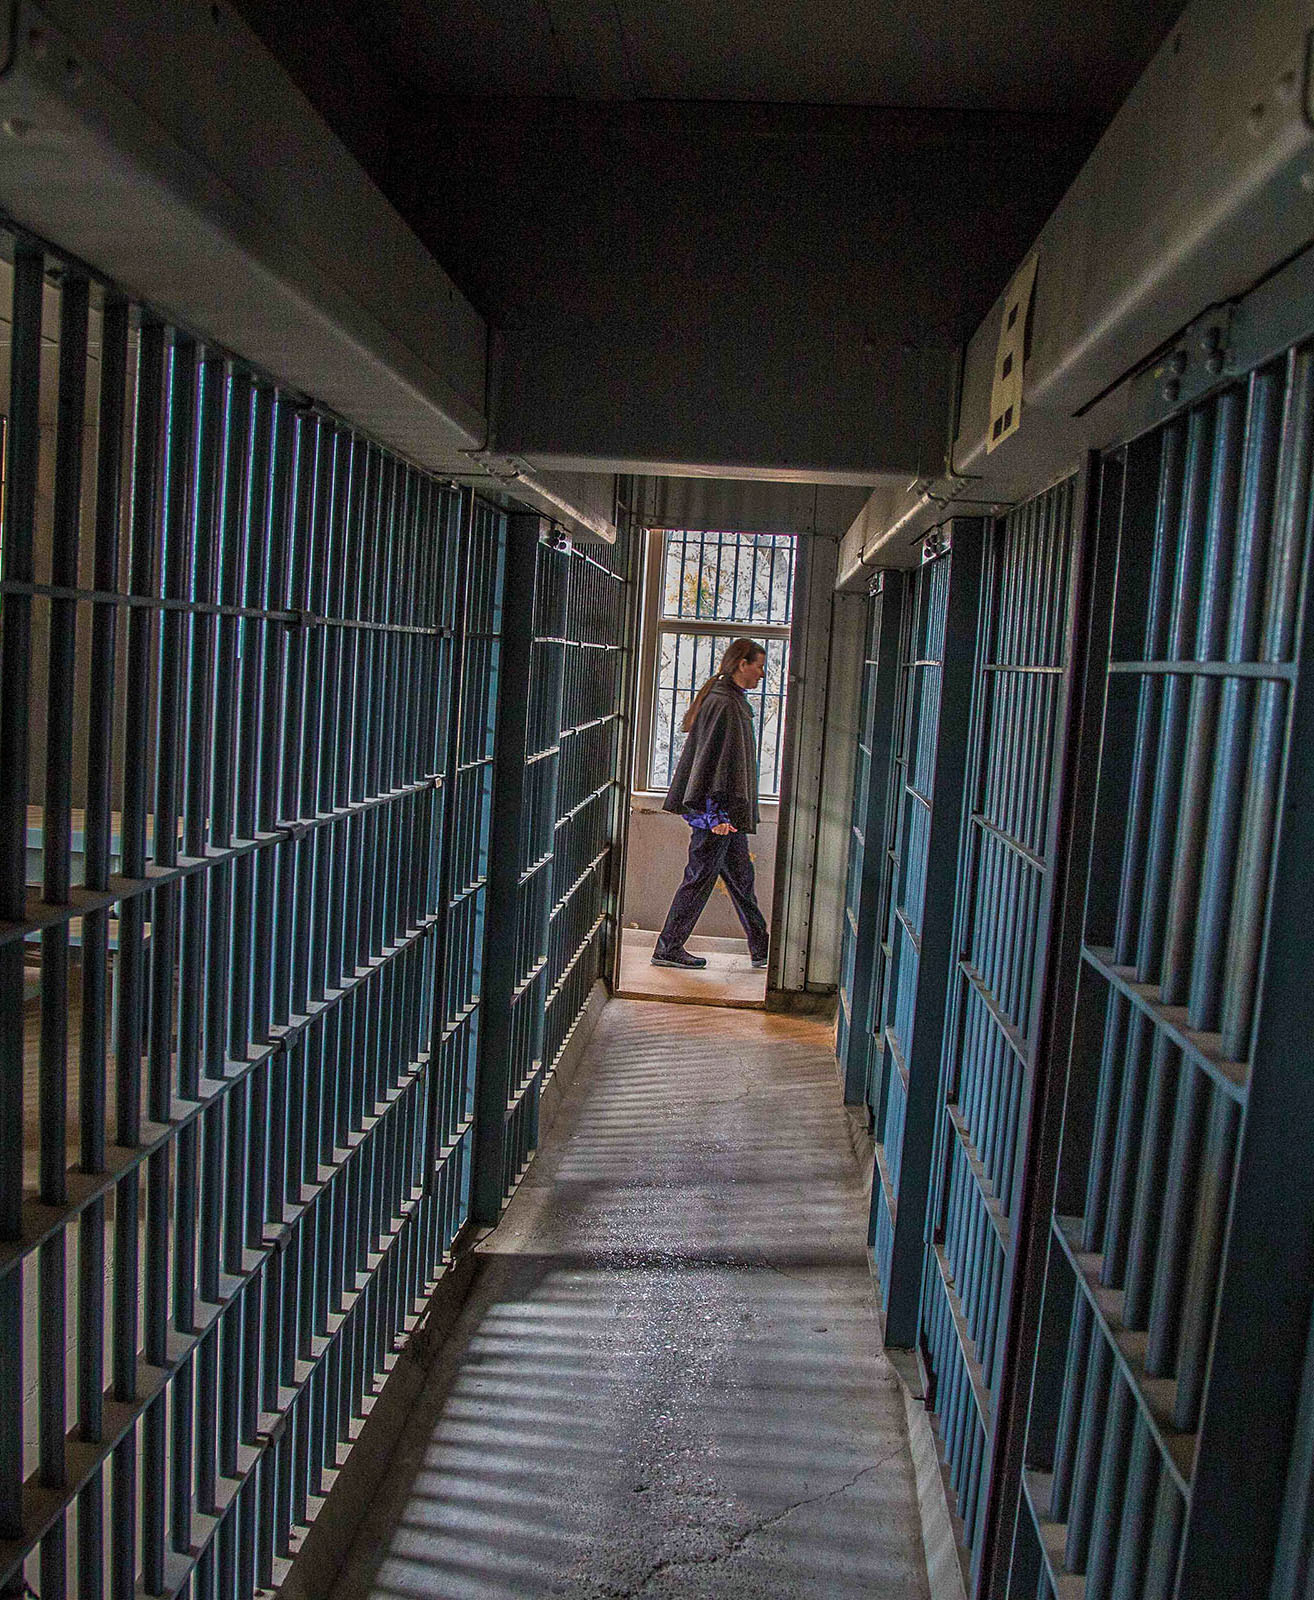 A person walks down a hallway of jail cells